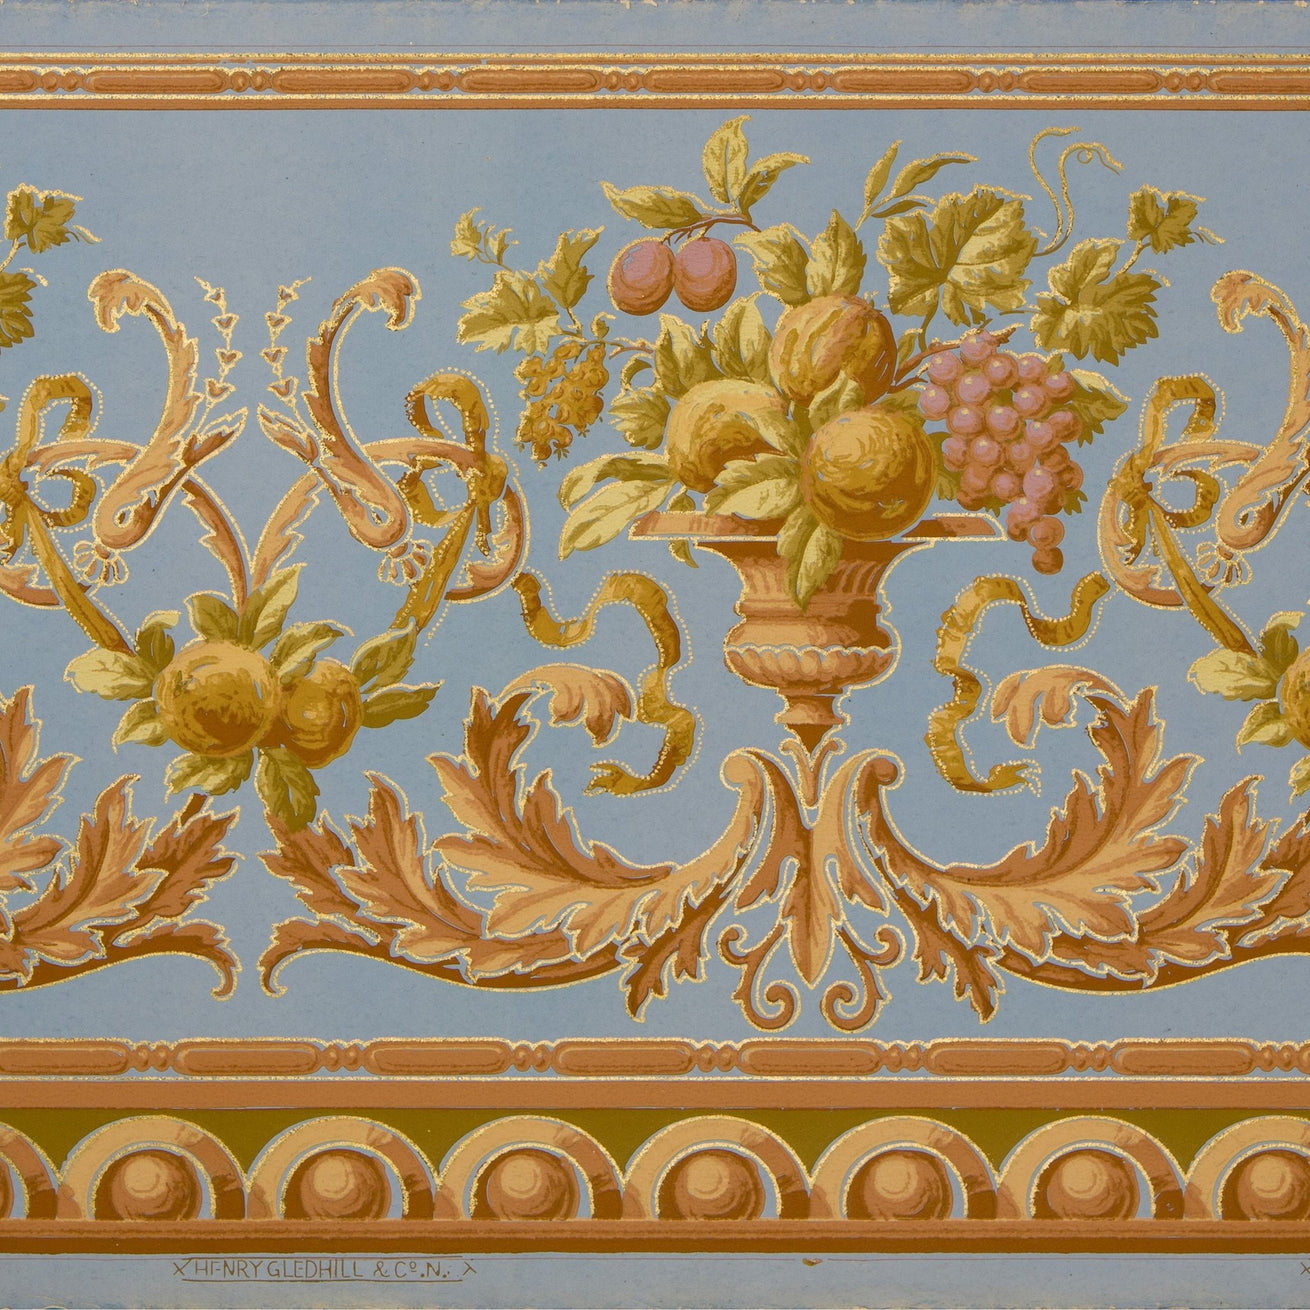 Classical Frieze with Urns, Fruit, Ribbons - Antique Wallpaper Remnant